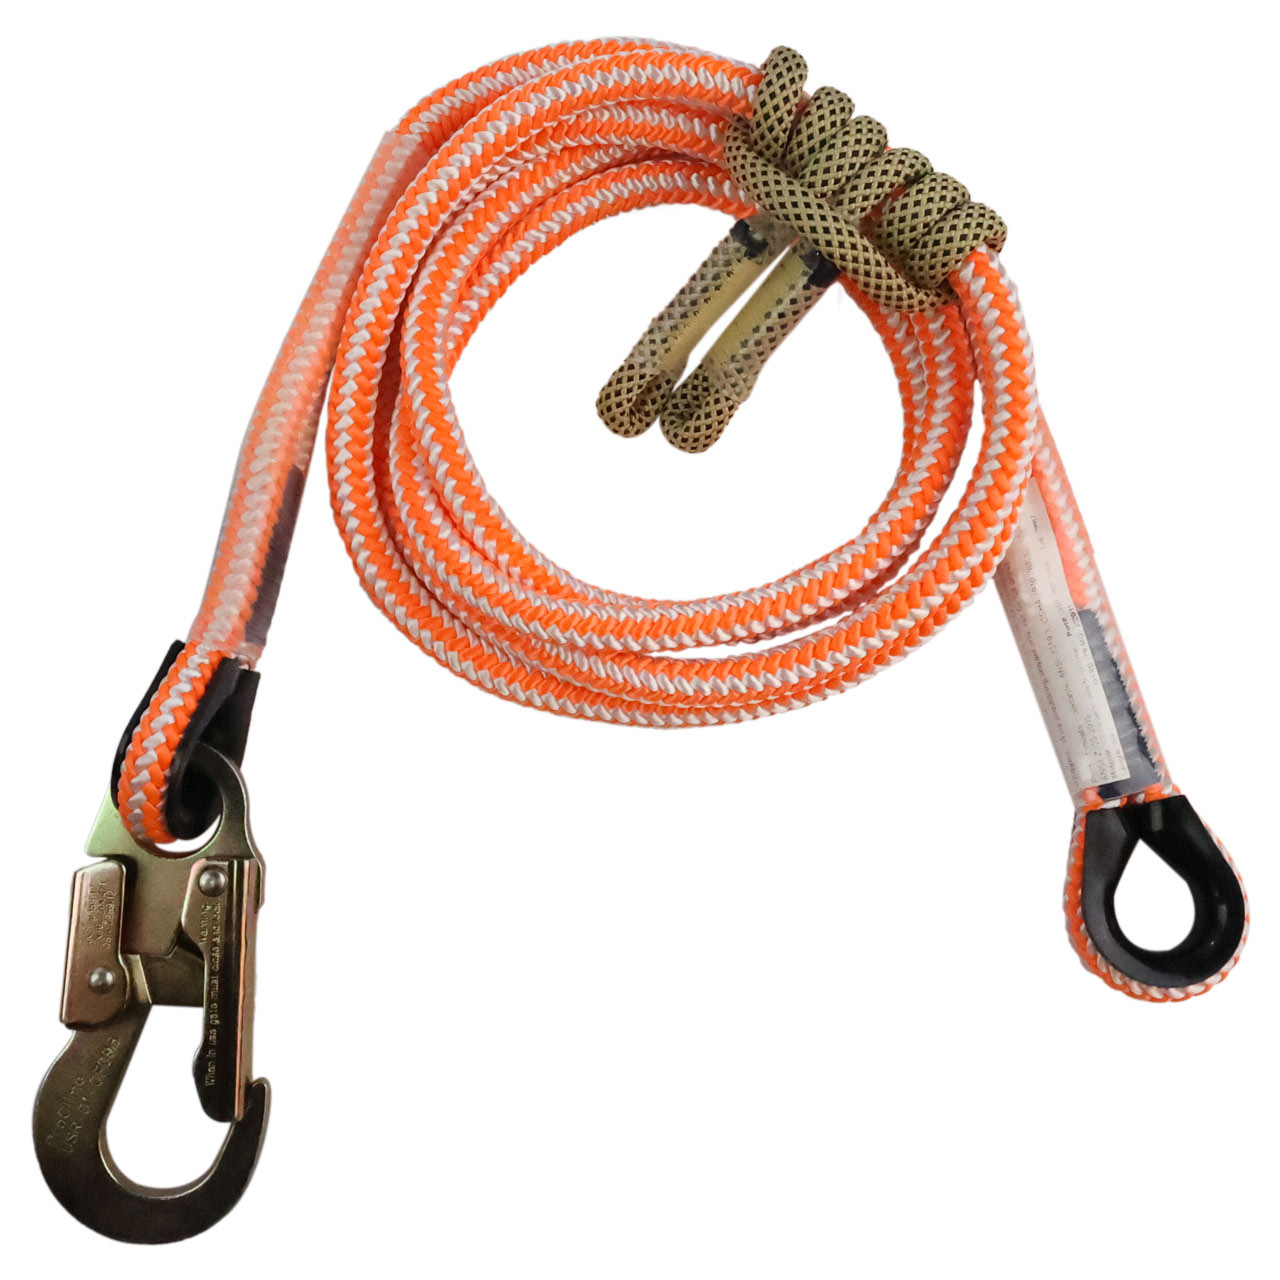 Climbing Technology - #TradeFair - News 2022 at VERTICAL PRO Our 2022 news  for #climbing and #mountaineering, TUNER I is an I-shaped adjustable  lanyard made of dynamic rope, ideal in every mountain